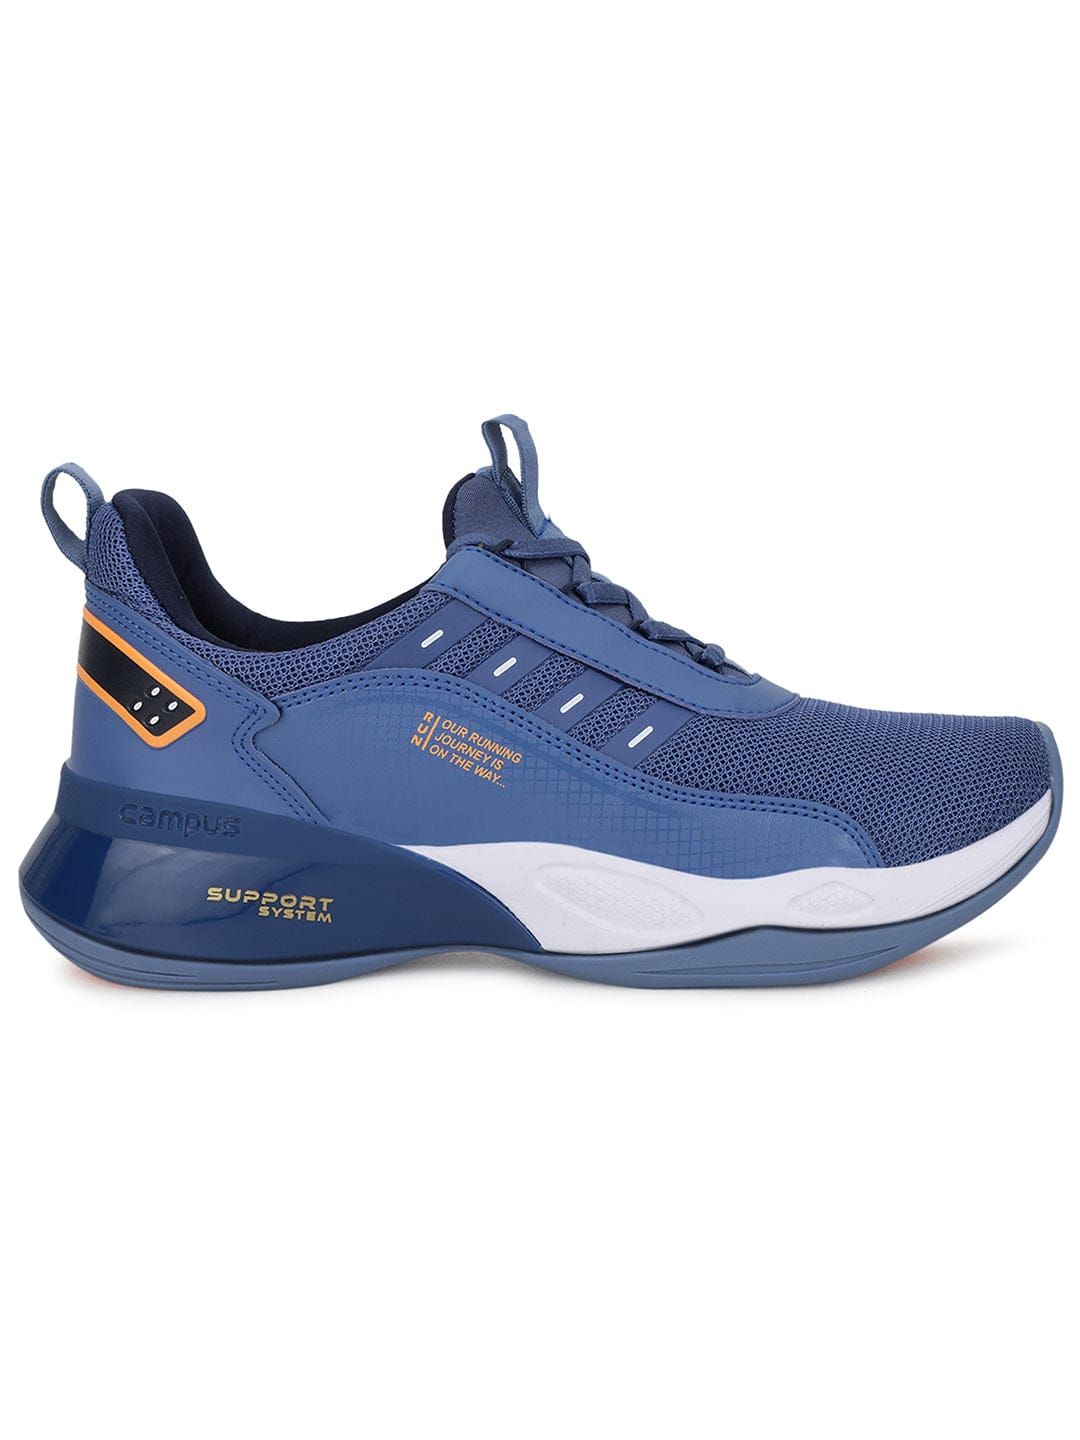 Buy TERMINATOR Blue Men's Running Shoes online | Campus Shoes